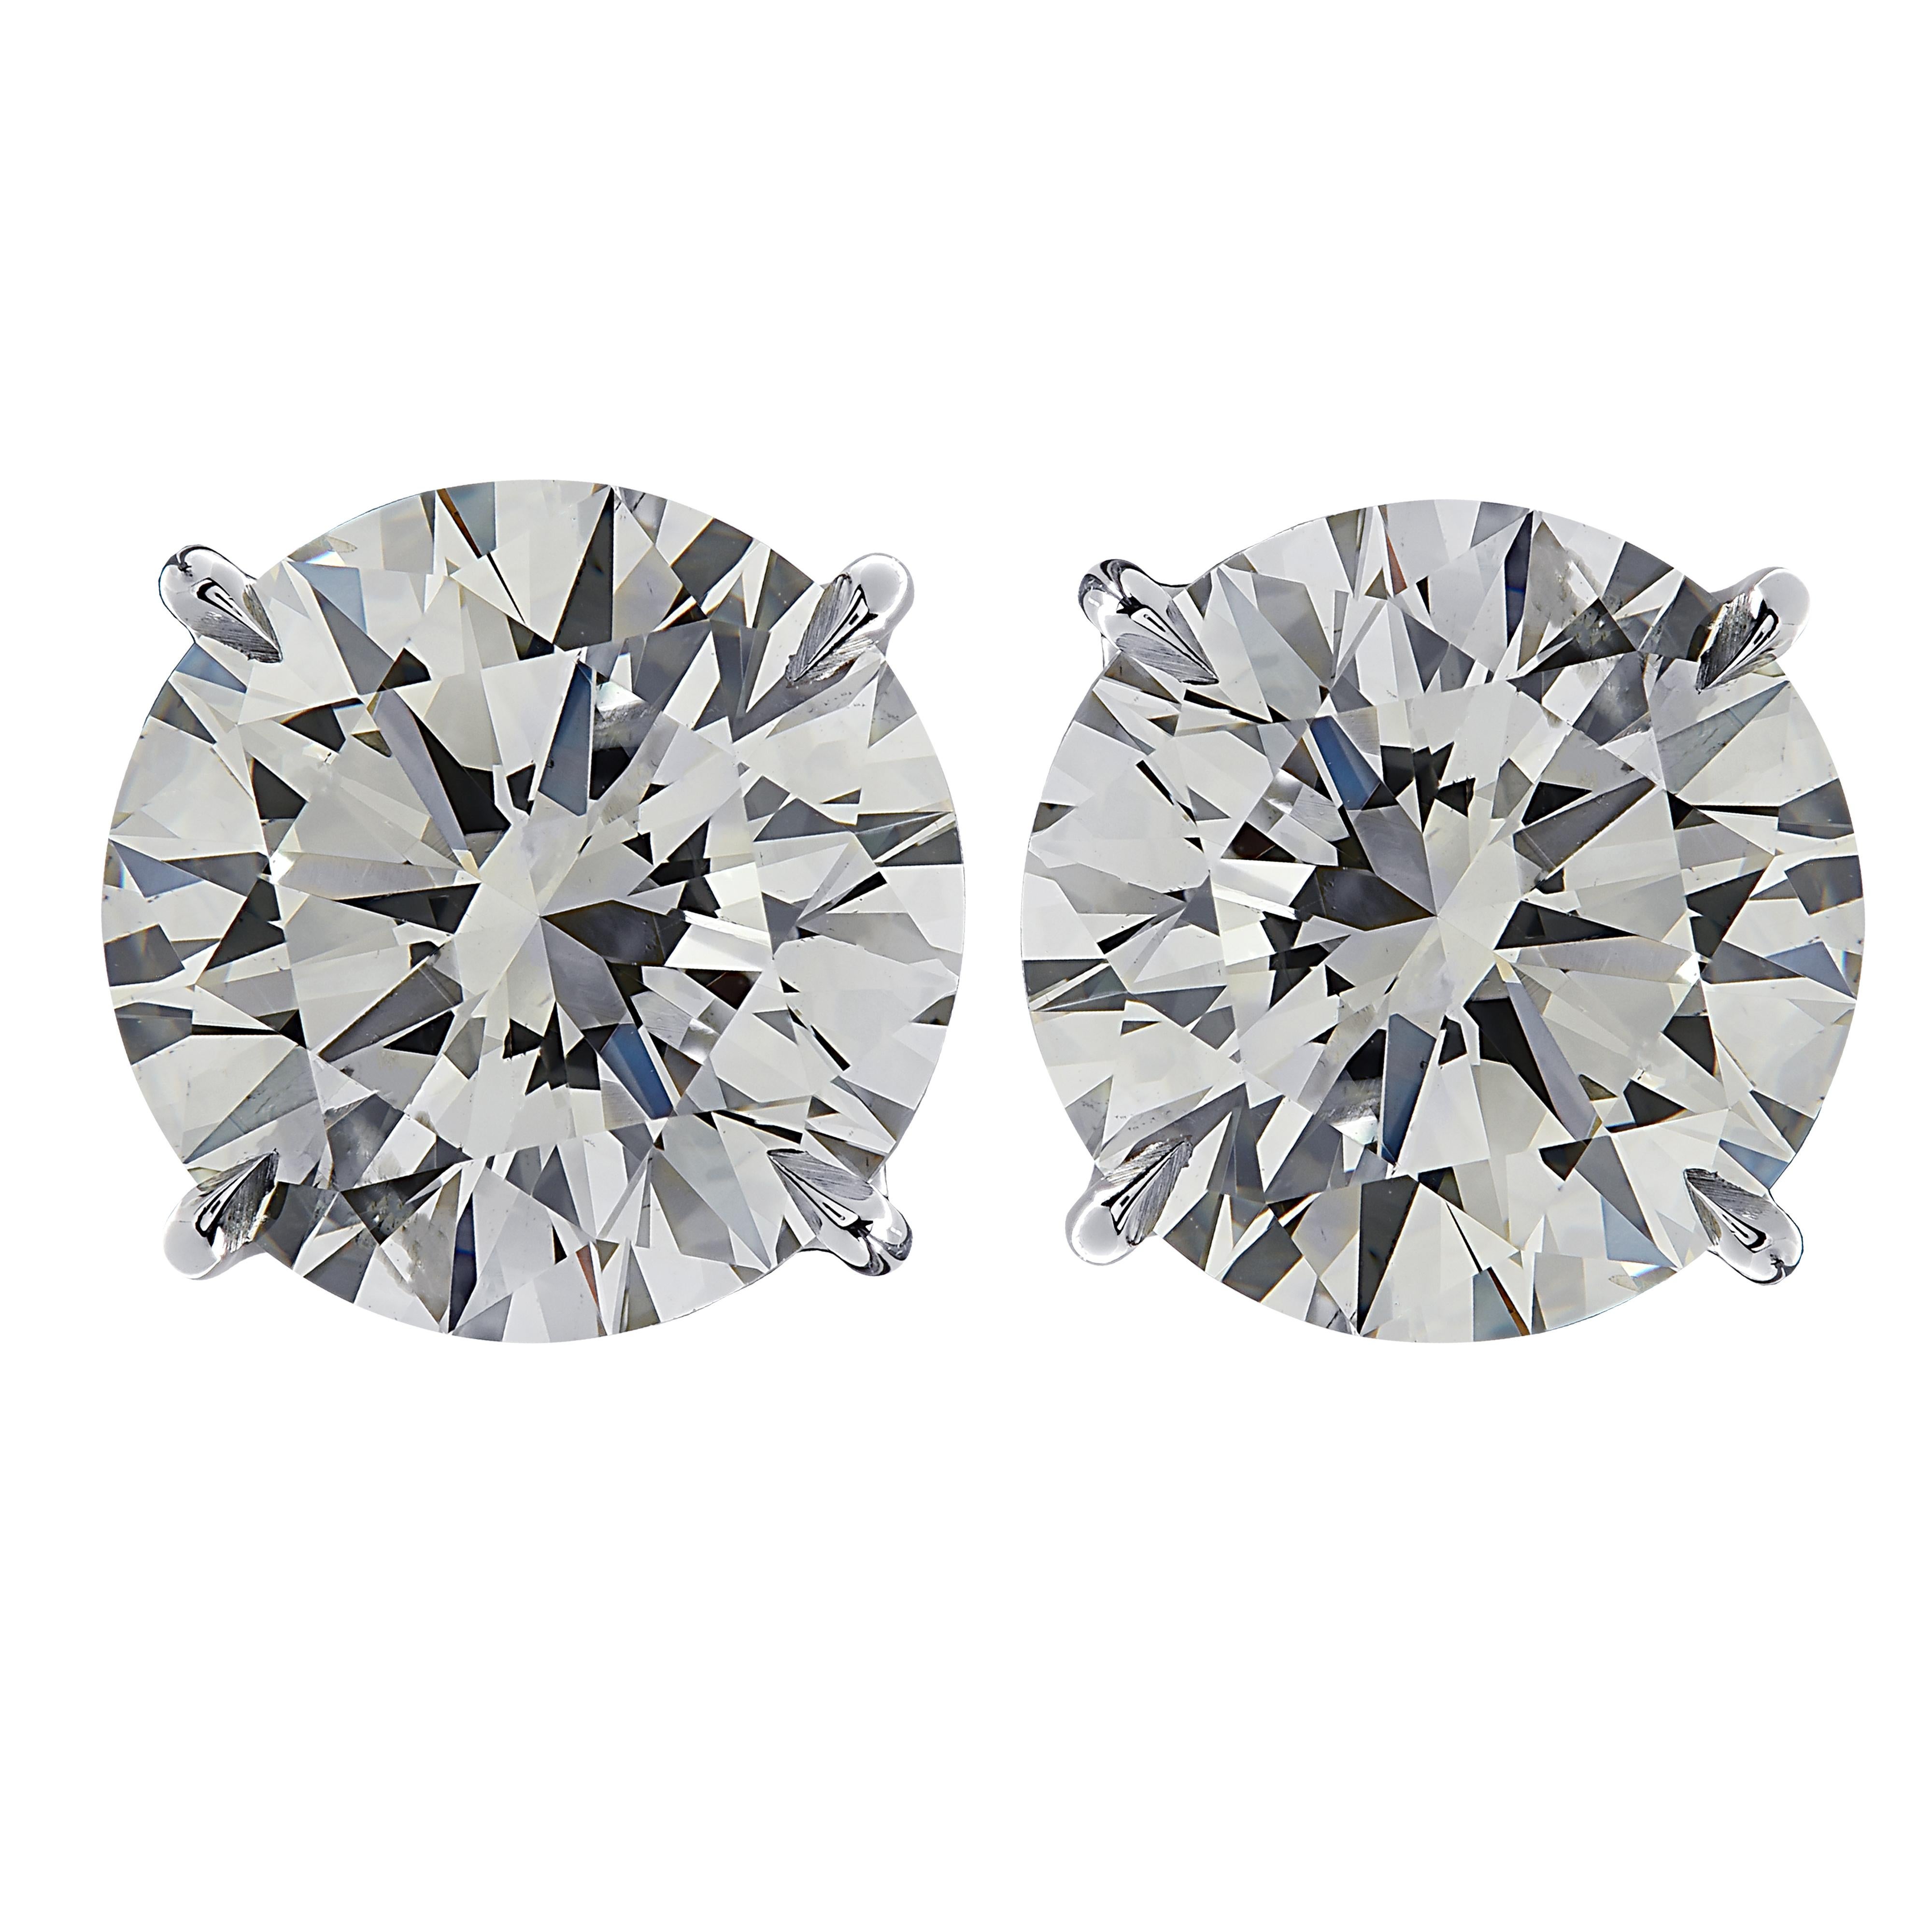 Stunning Vivid Diamonds solitaire stud earrings crafted in platinum, showcasing 2 spectacular GIA Certified round brilliant cut diamonds weighing 6.01 carats total, I color SI2 clarity. These diamonds were carefully selected and perfectly matched to